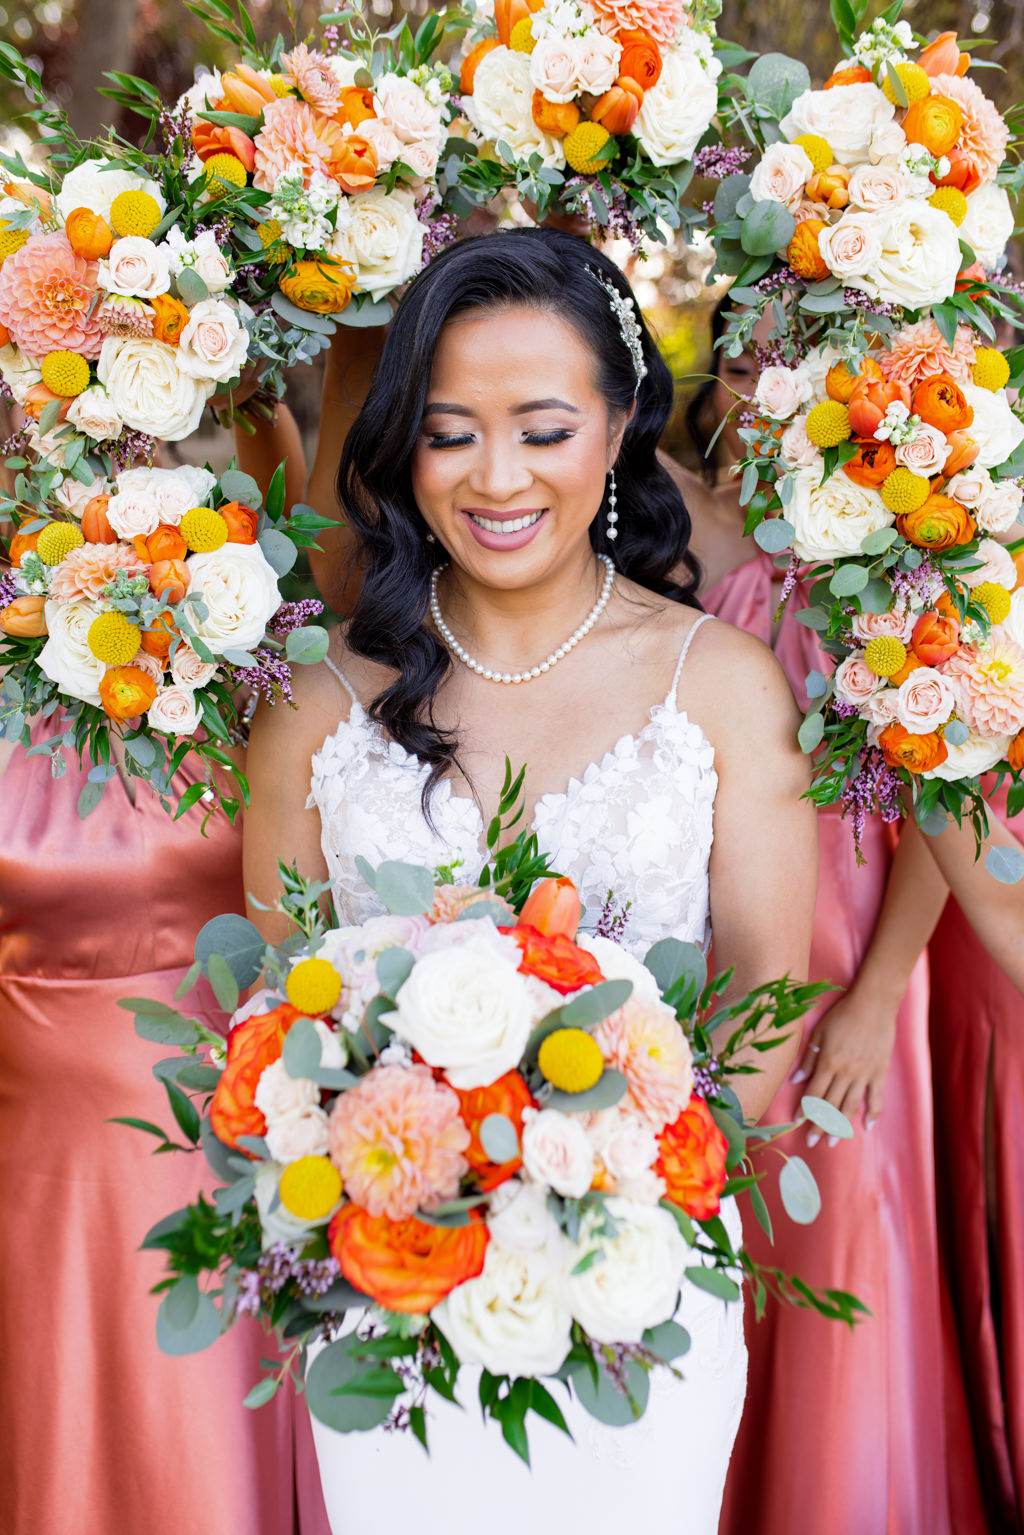 Bride relaxed and happy in the flowers at her Catta verdera wedding